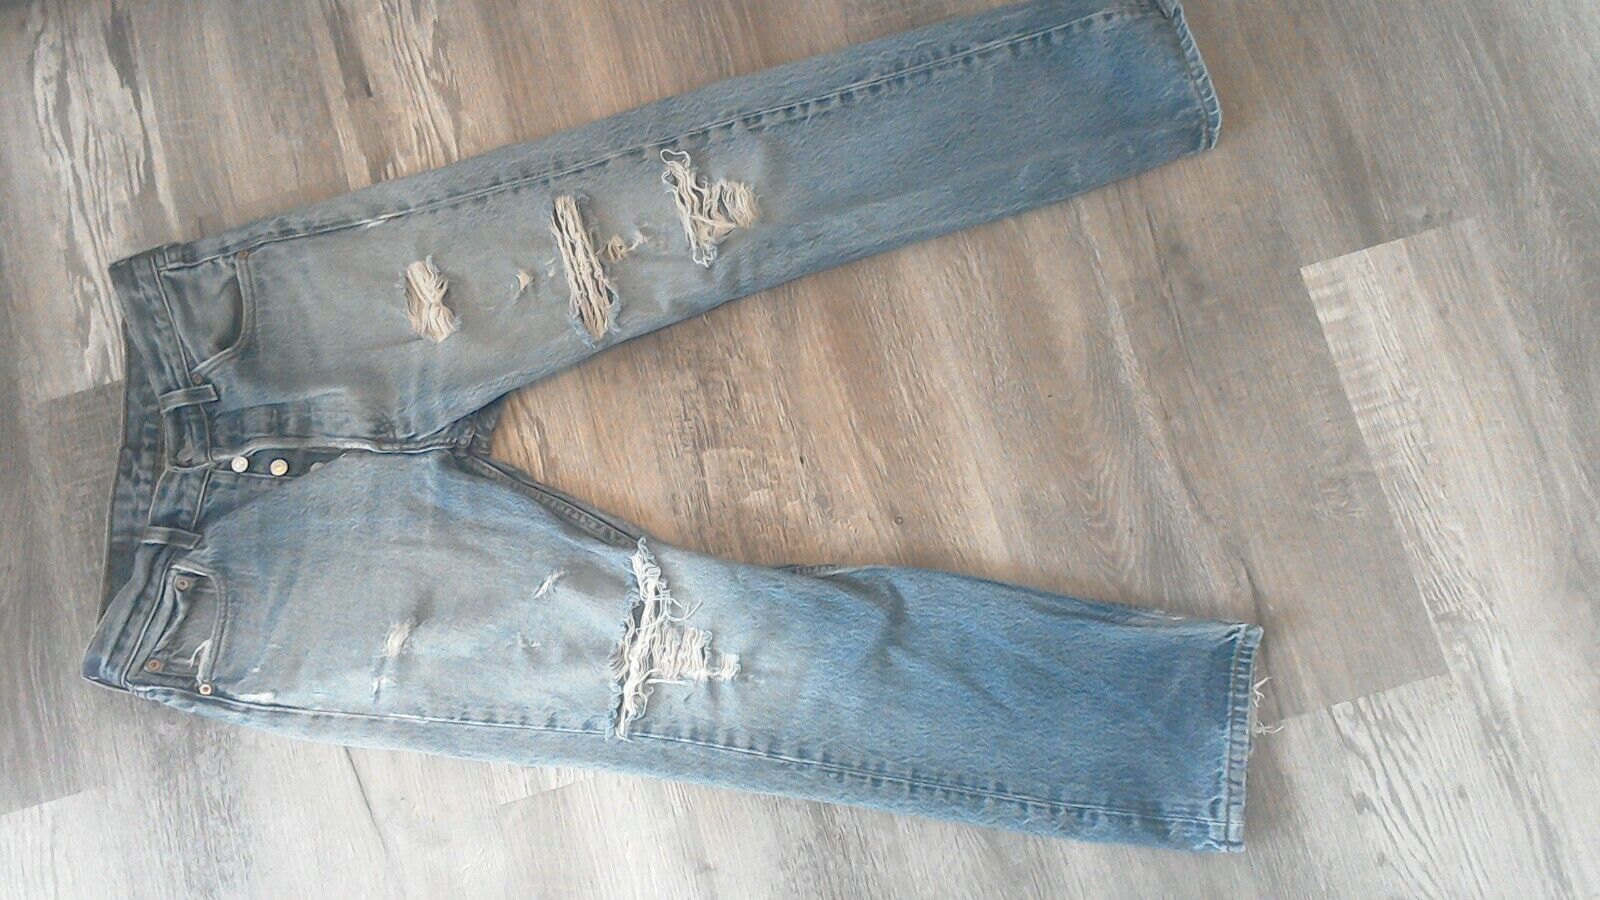 LEVIapos;S VTG 501 BUTTON FLY Long-awaited Popular popular JEANS SIZE 30 tag 31 x 27 a X